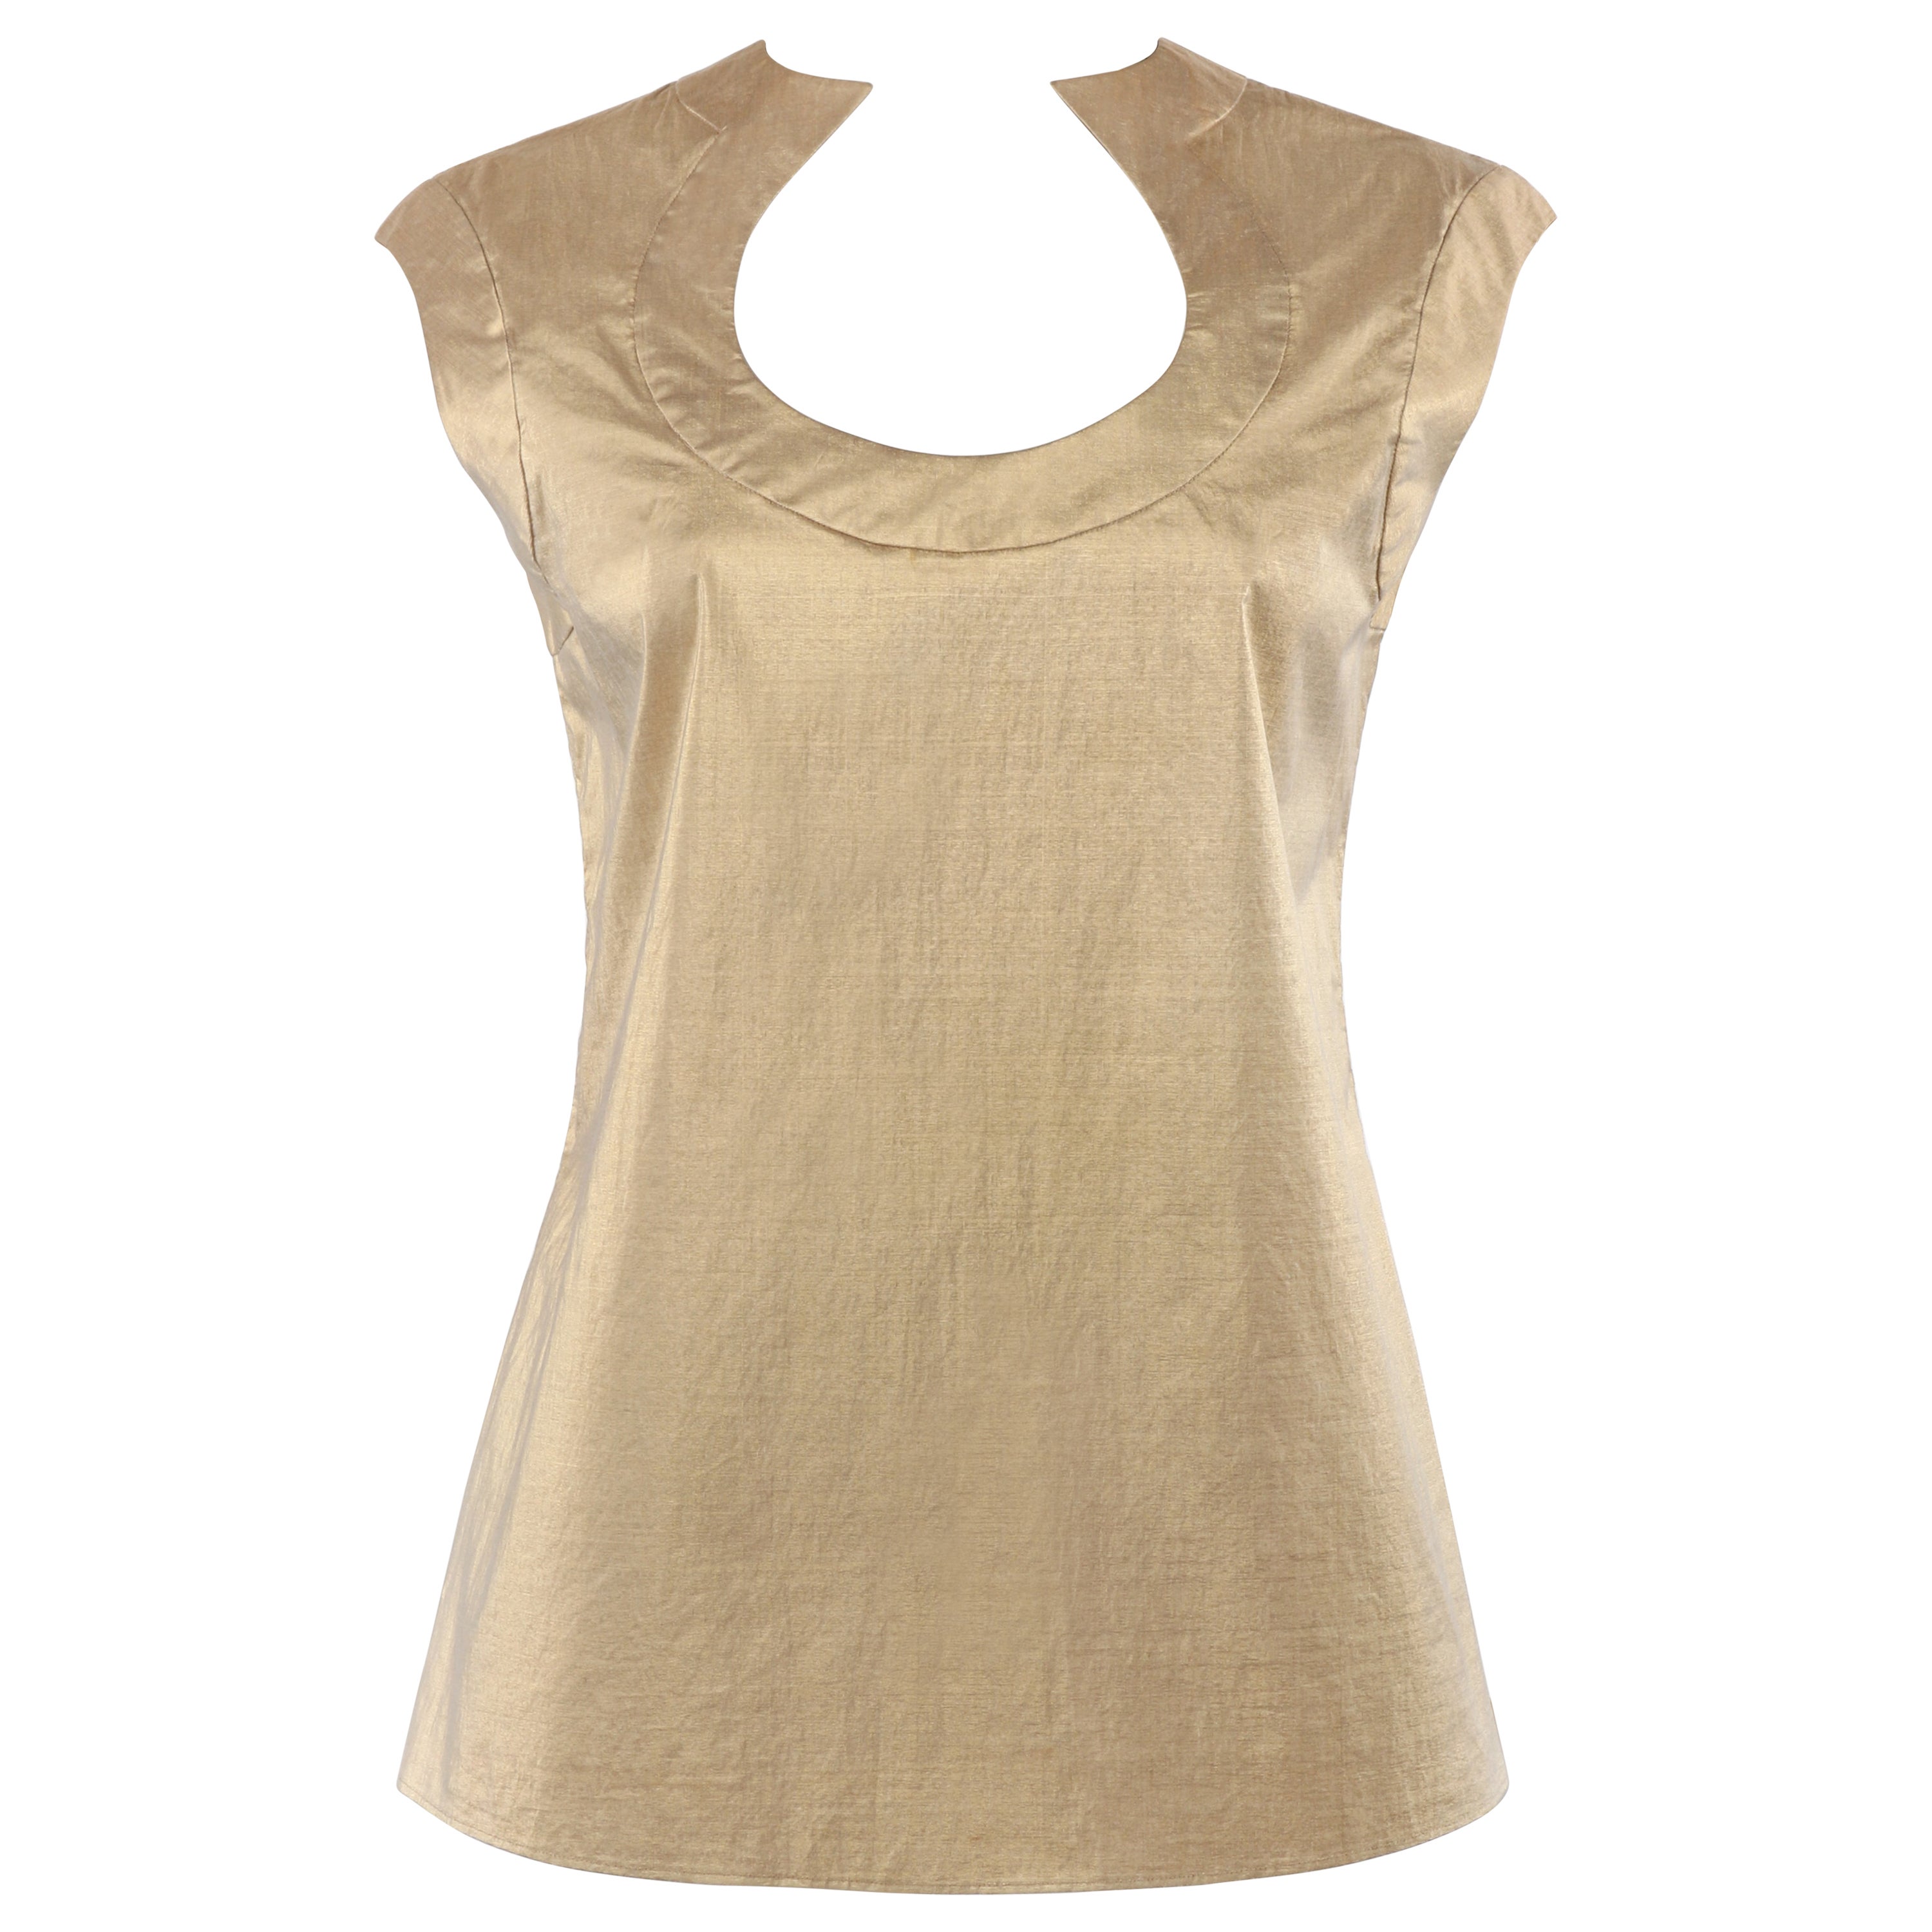 ALEXANDER McQUEEN S/S 2000 "Eye" Gold Metallic Lame Form Fit Cutout Blouse Top For Sale